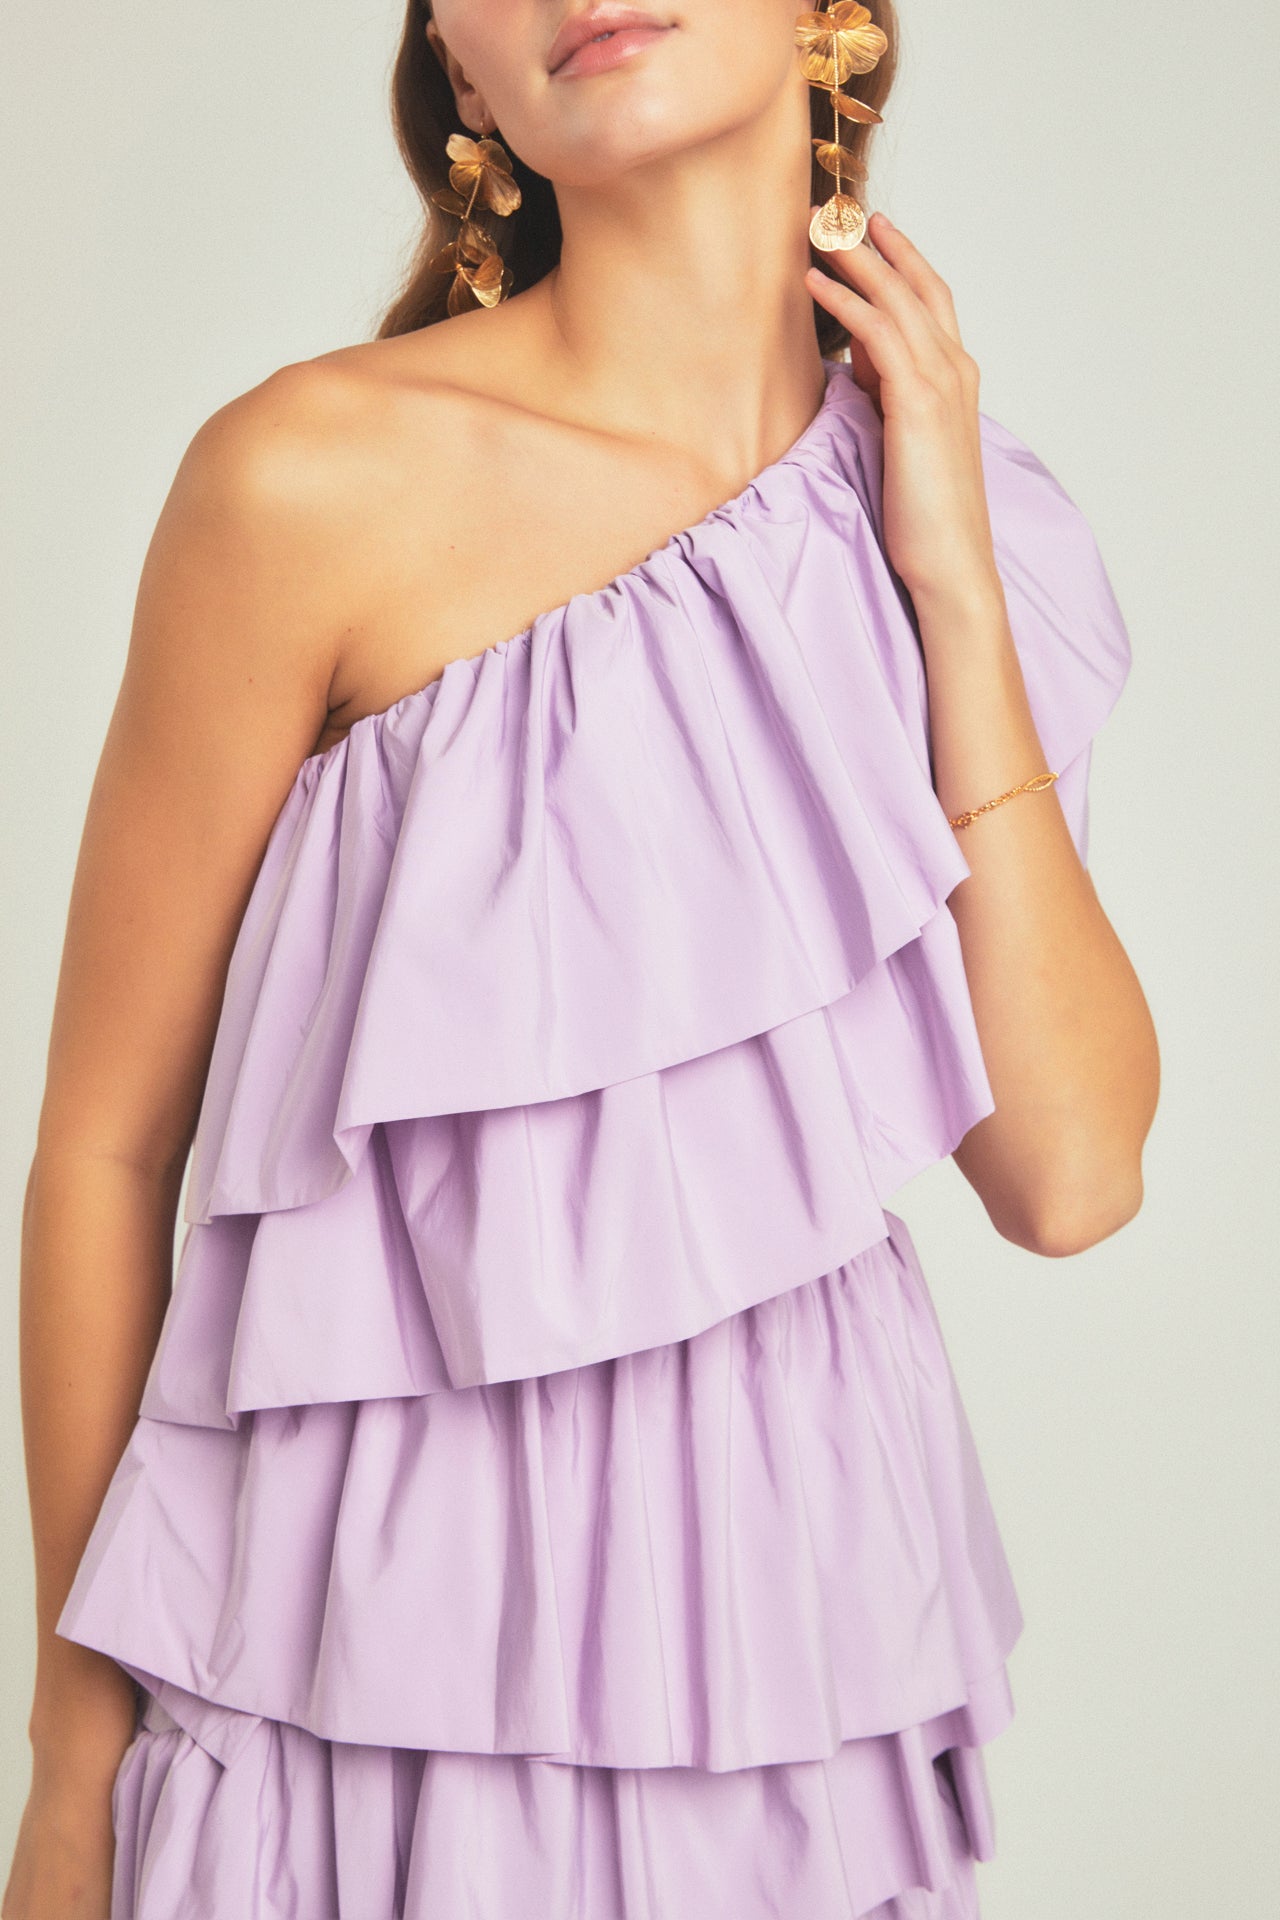 Discover our One-Shoulder Ruffled Mini Dress from our Spring Capsule: SS Wardrobe '24 Editorial